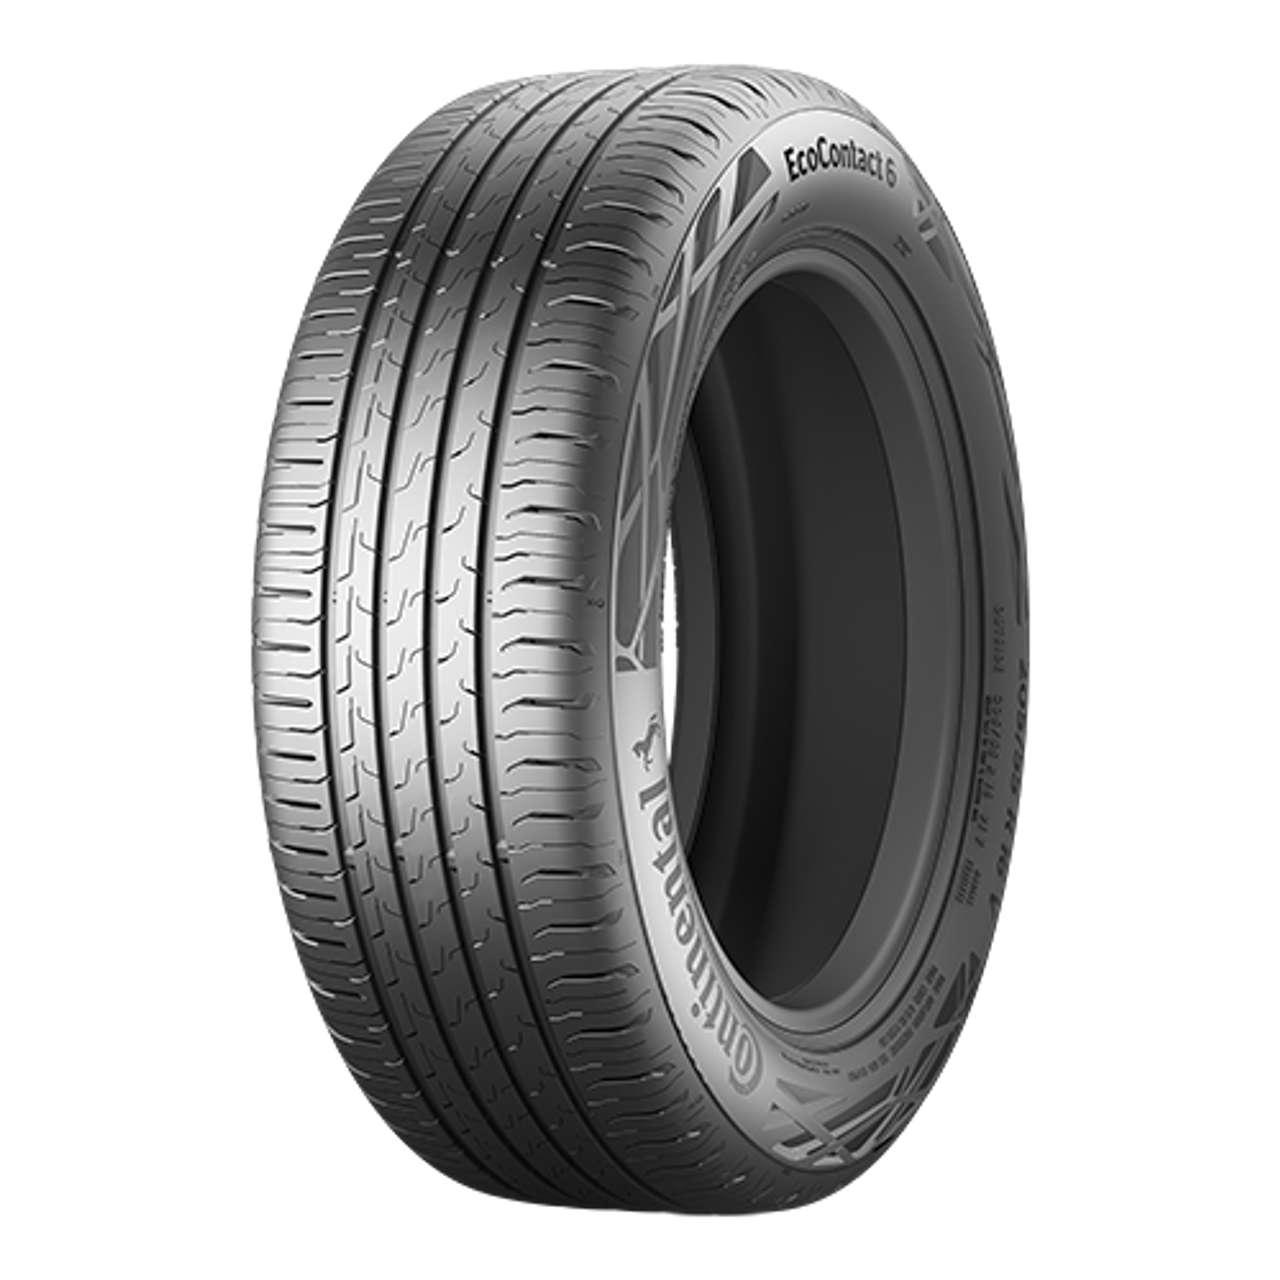 CONTINENTAL ECOCONTACT 6 (AO1) (EVc) 225/55R18 102Y